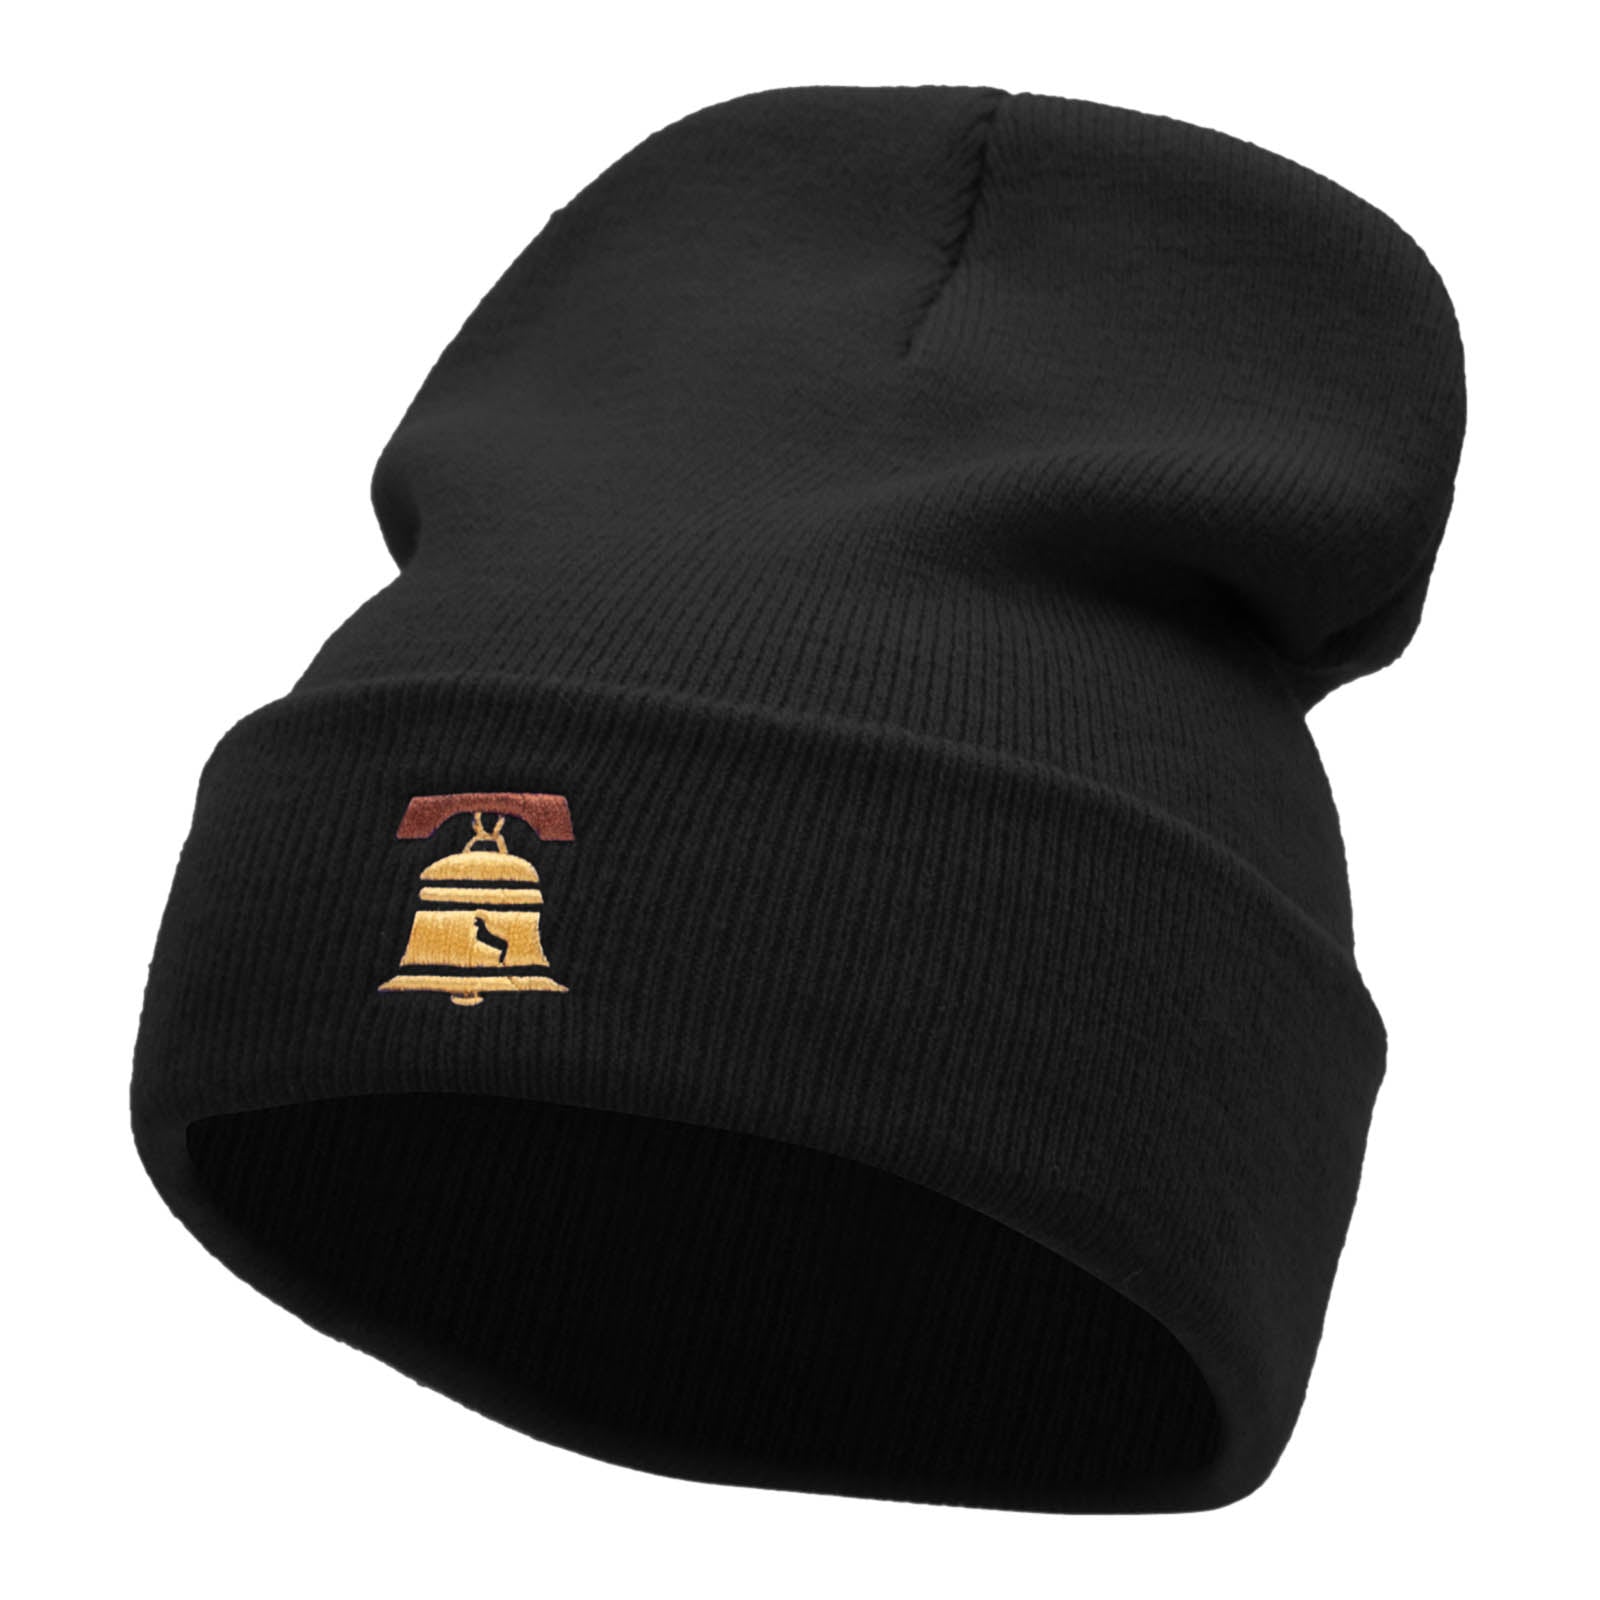 The Liberty Bell Embroidered 12 Inch Long Knitted Beanie - Black OSFM